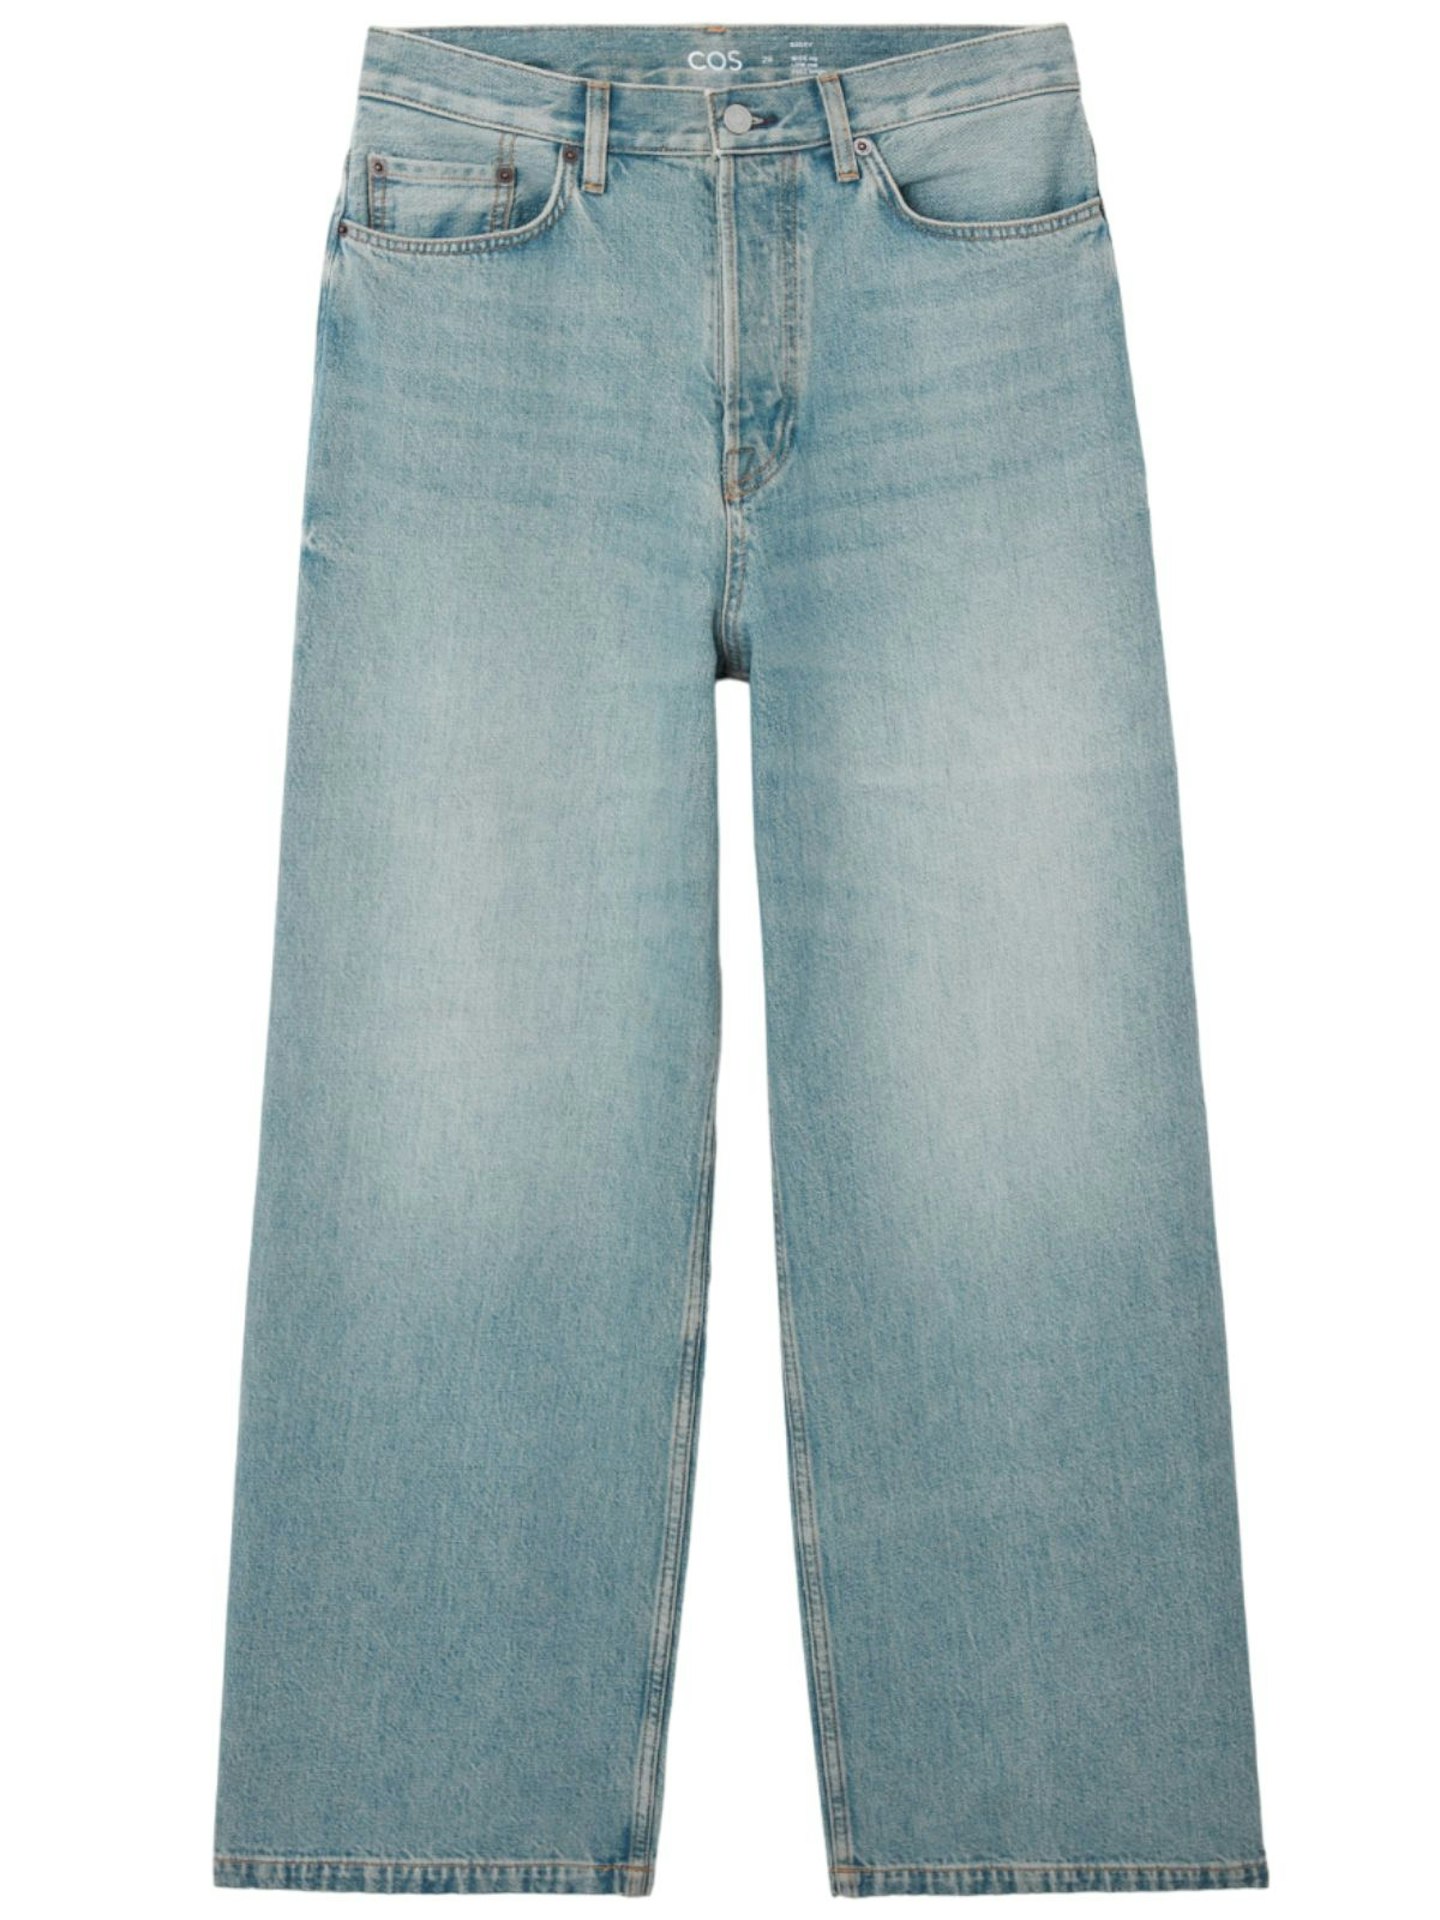 COS Volume Jeans - Wide